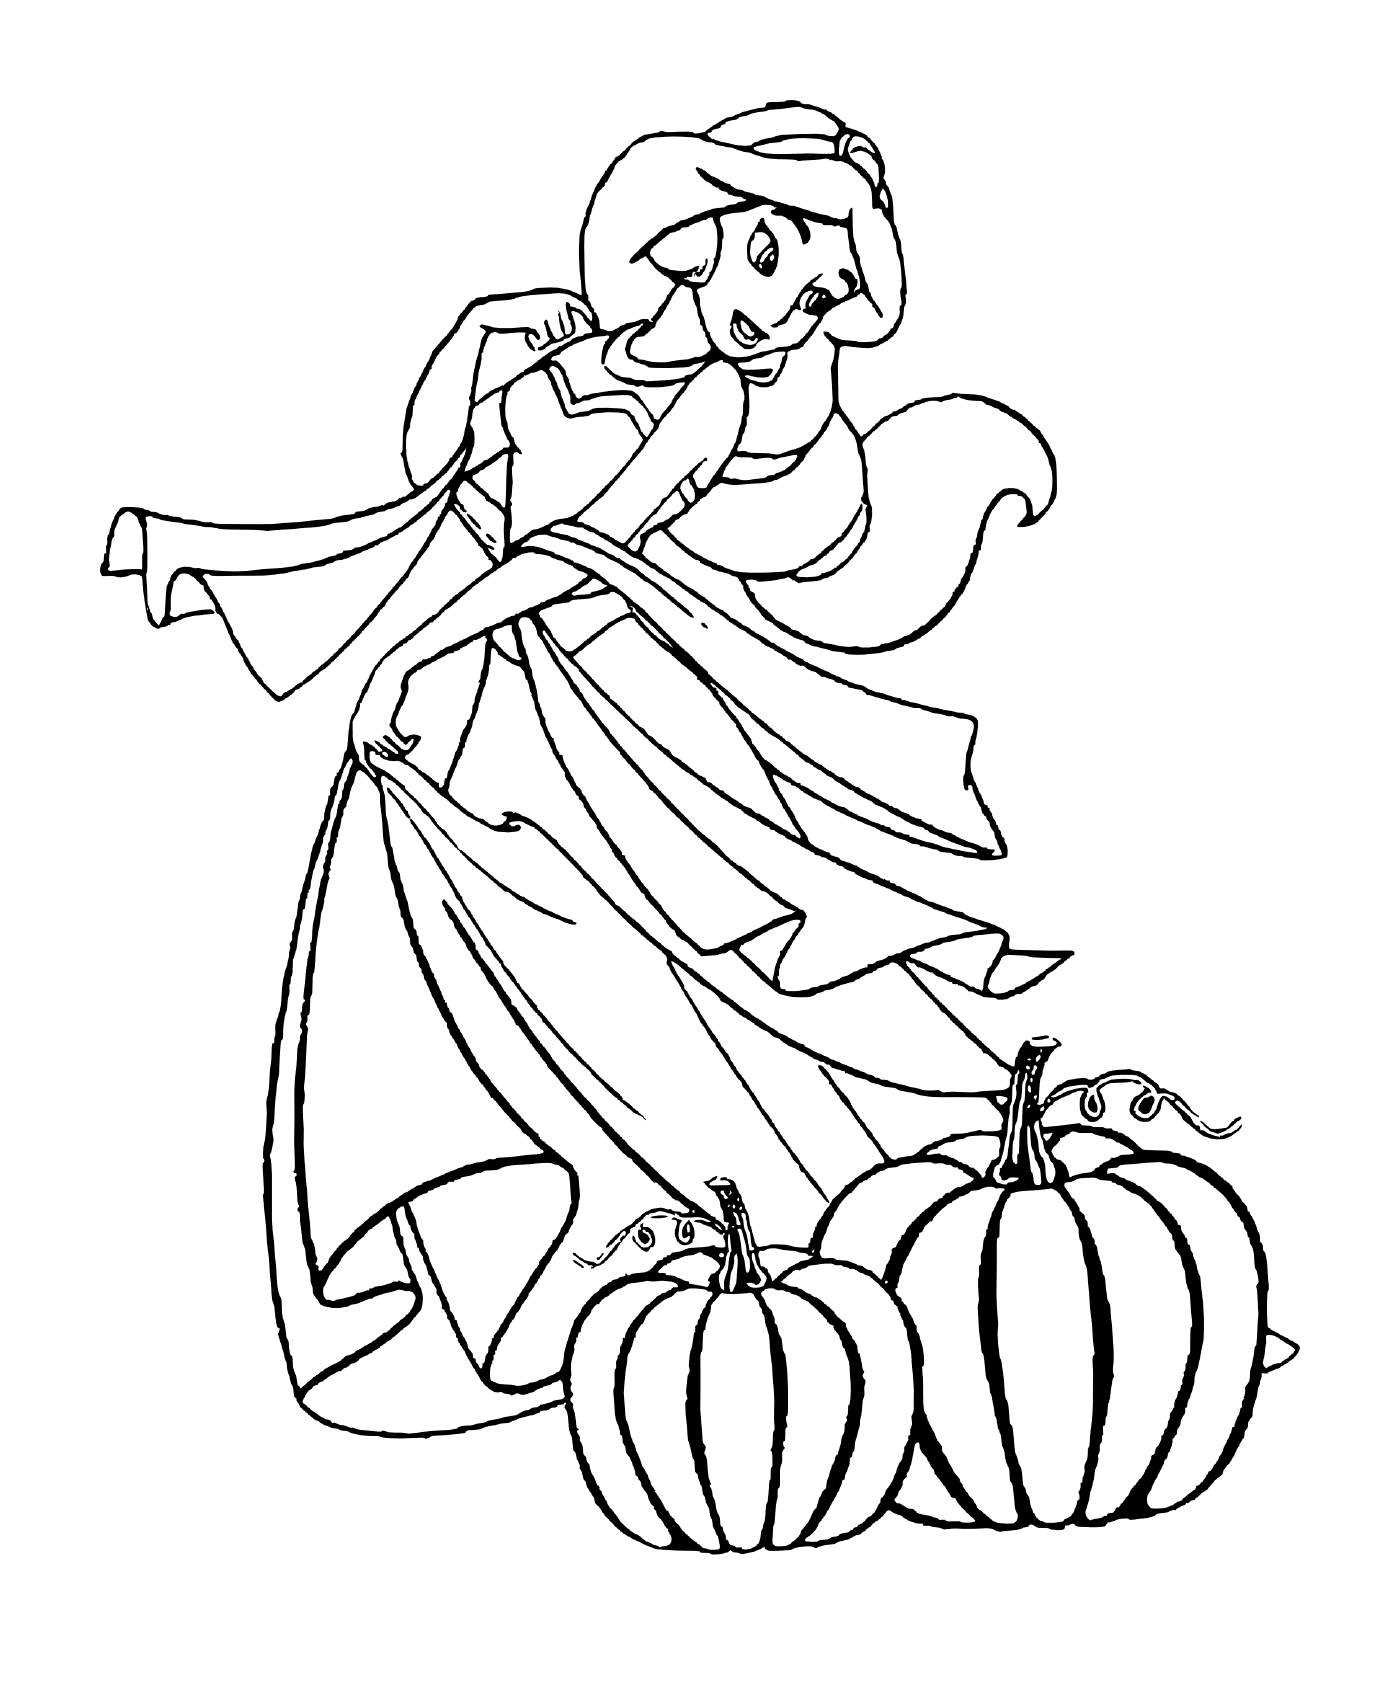  A woman with pumpkins 